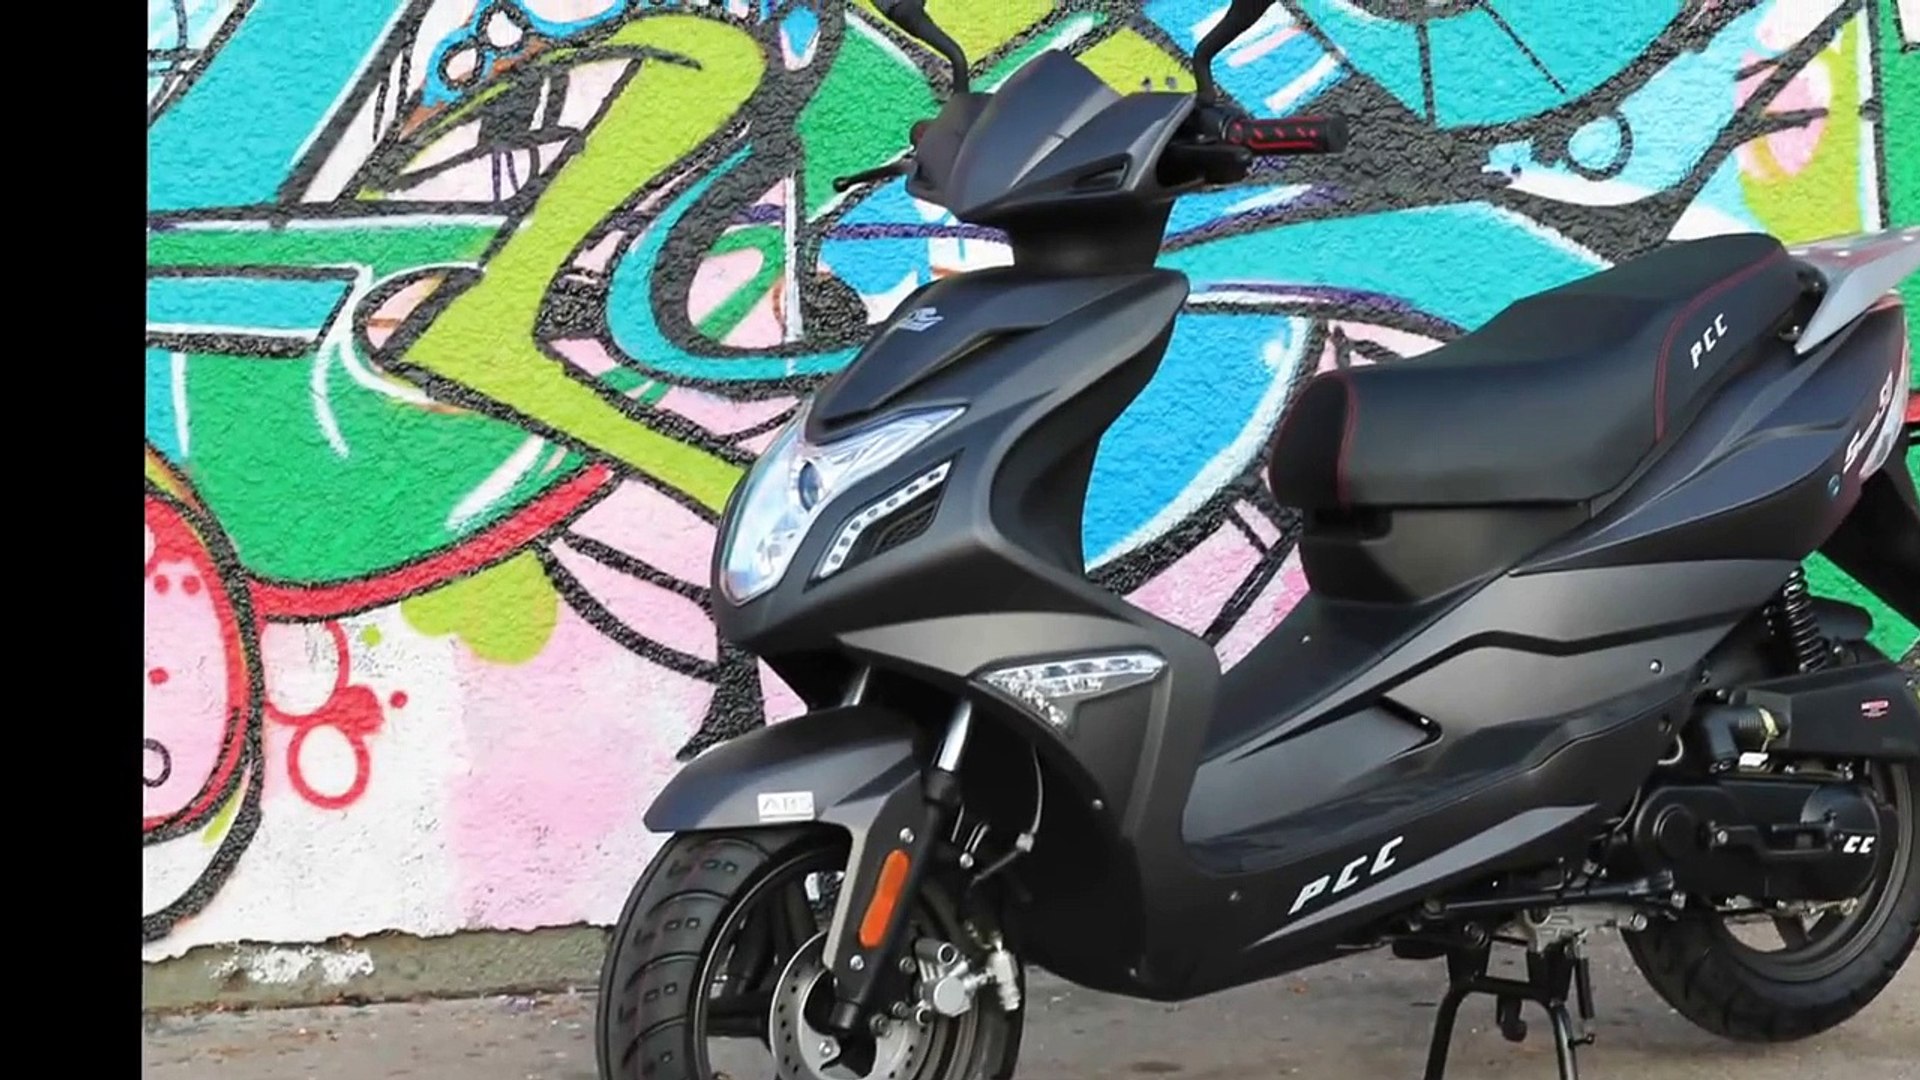 Puma Cycles Speedo 49cc/50cc sport scooter review - video Dailymotion